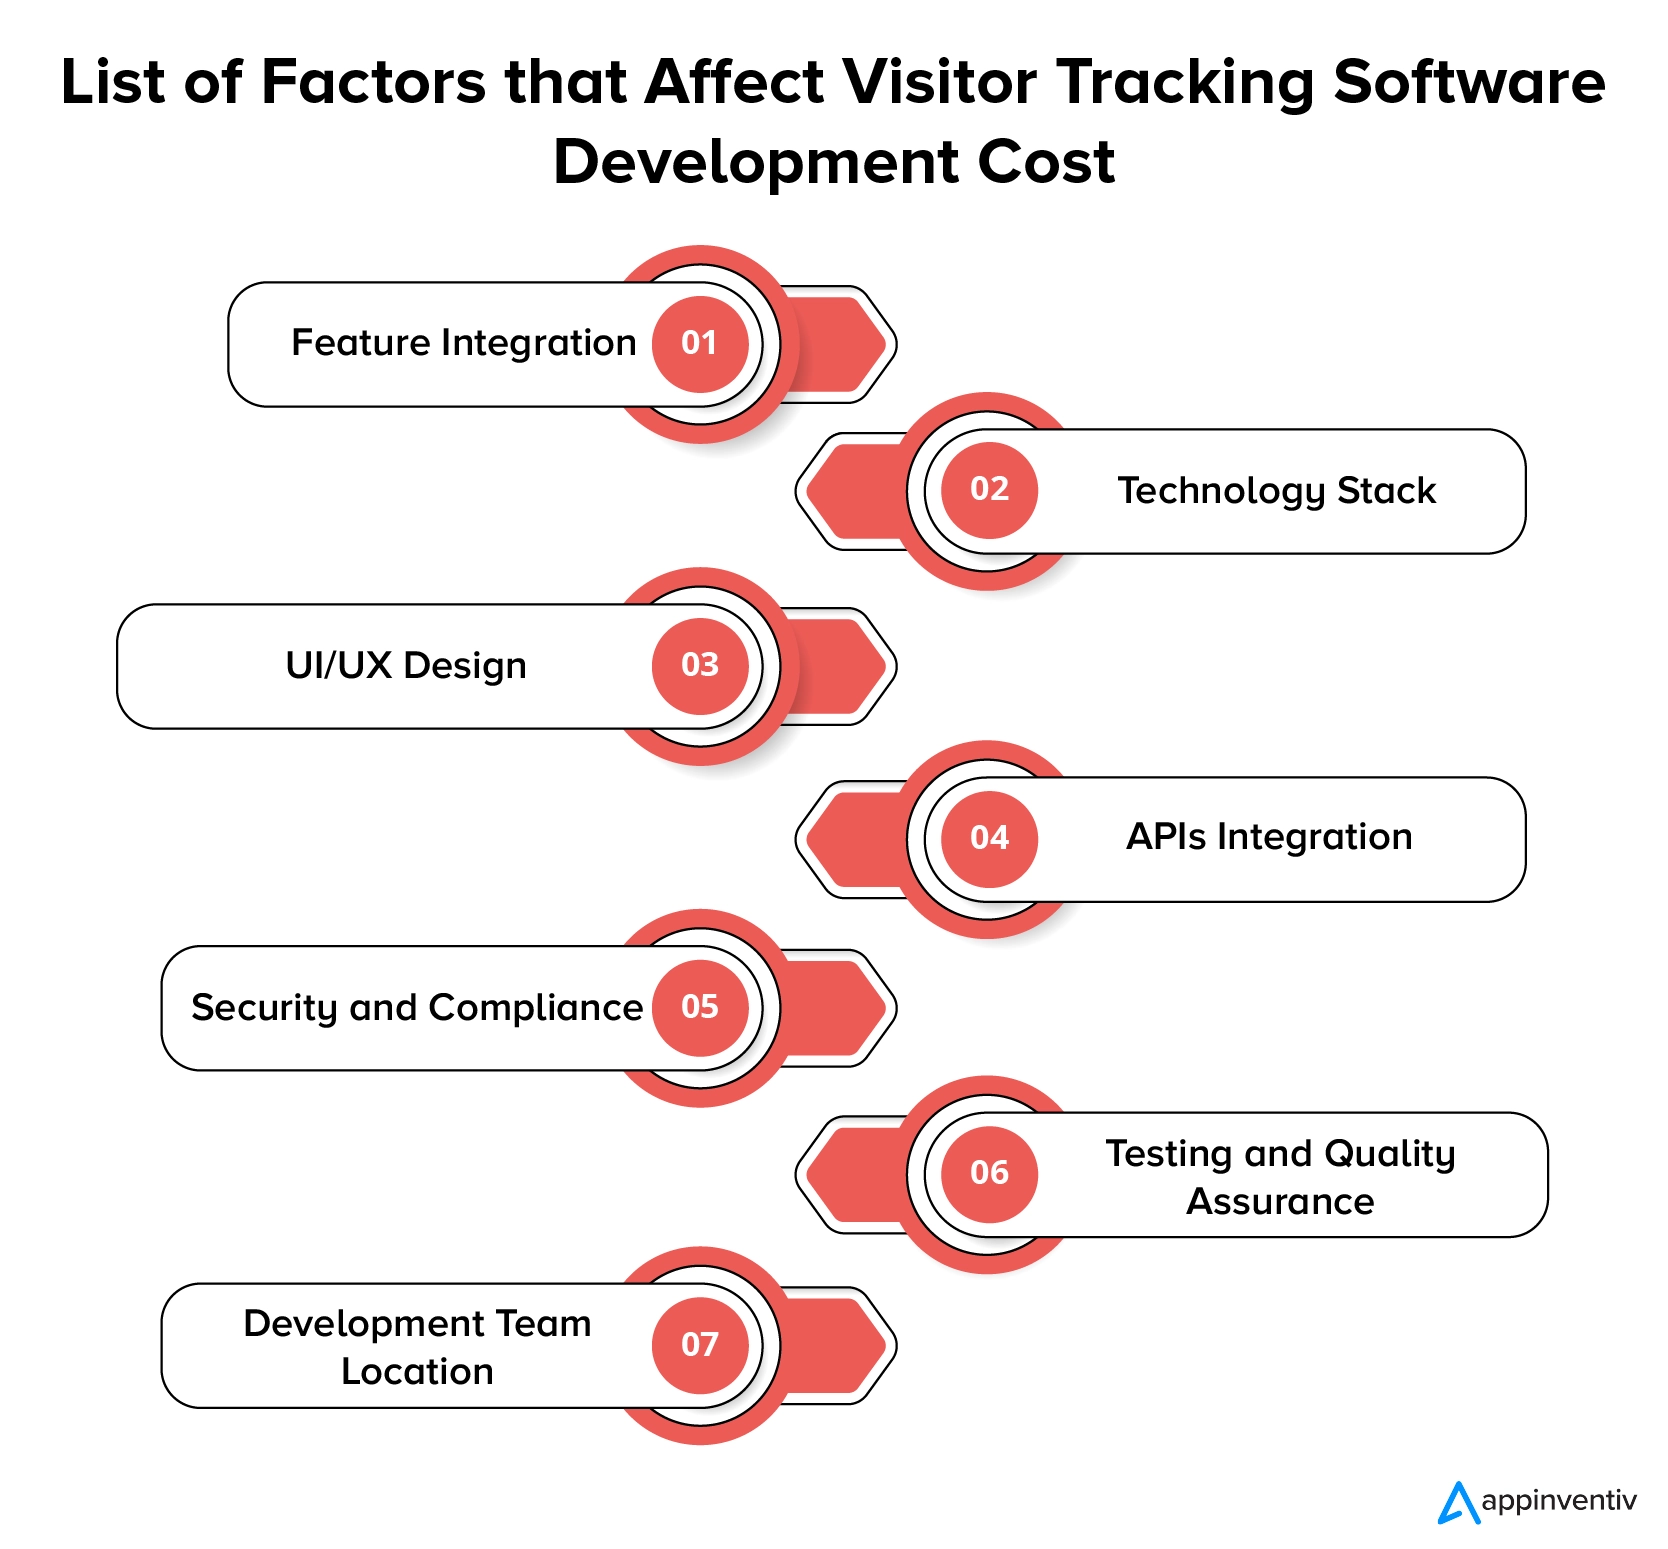 List of Factors that Affect Visitor Tracking Software Development Cost